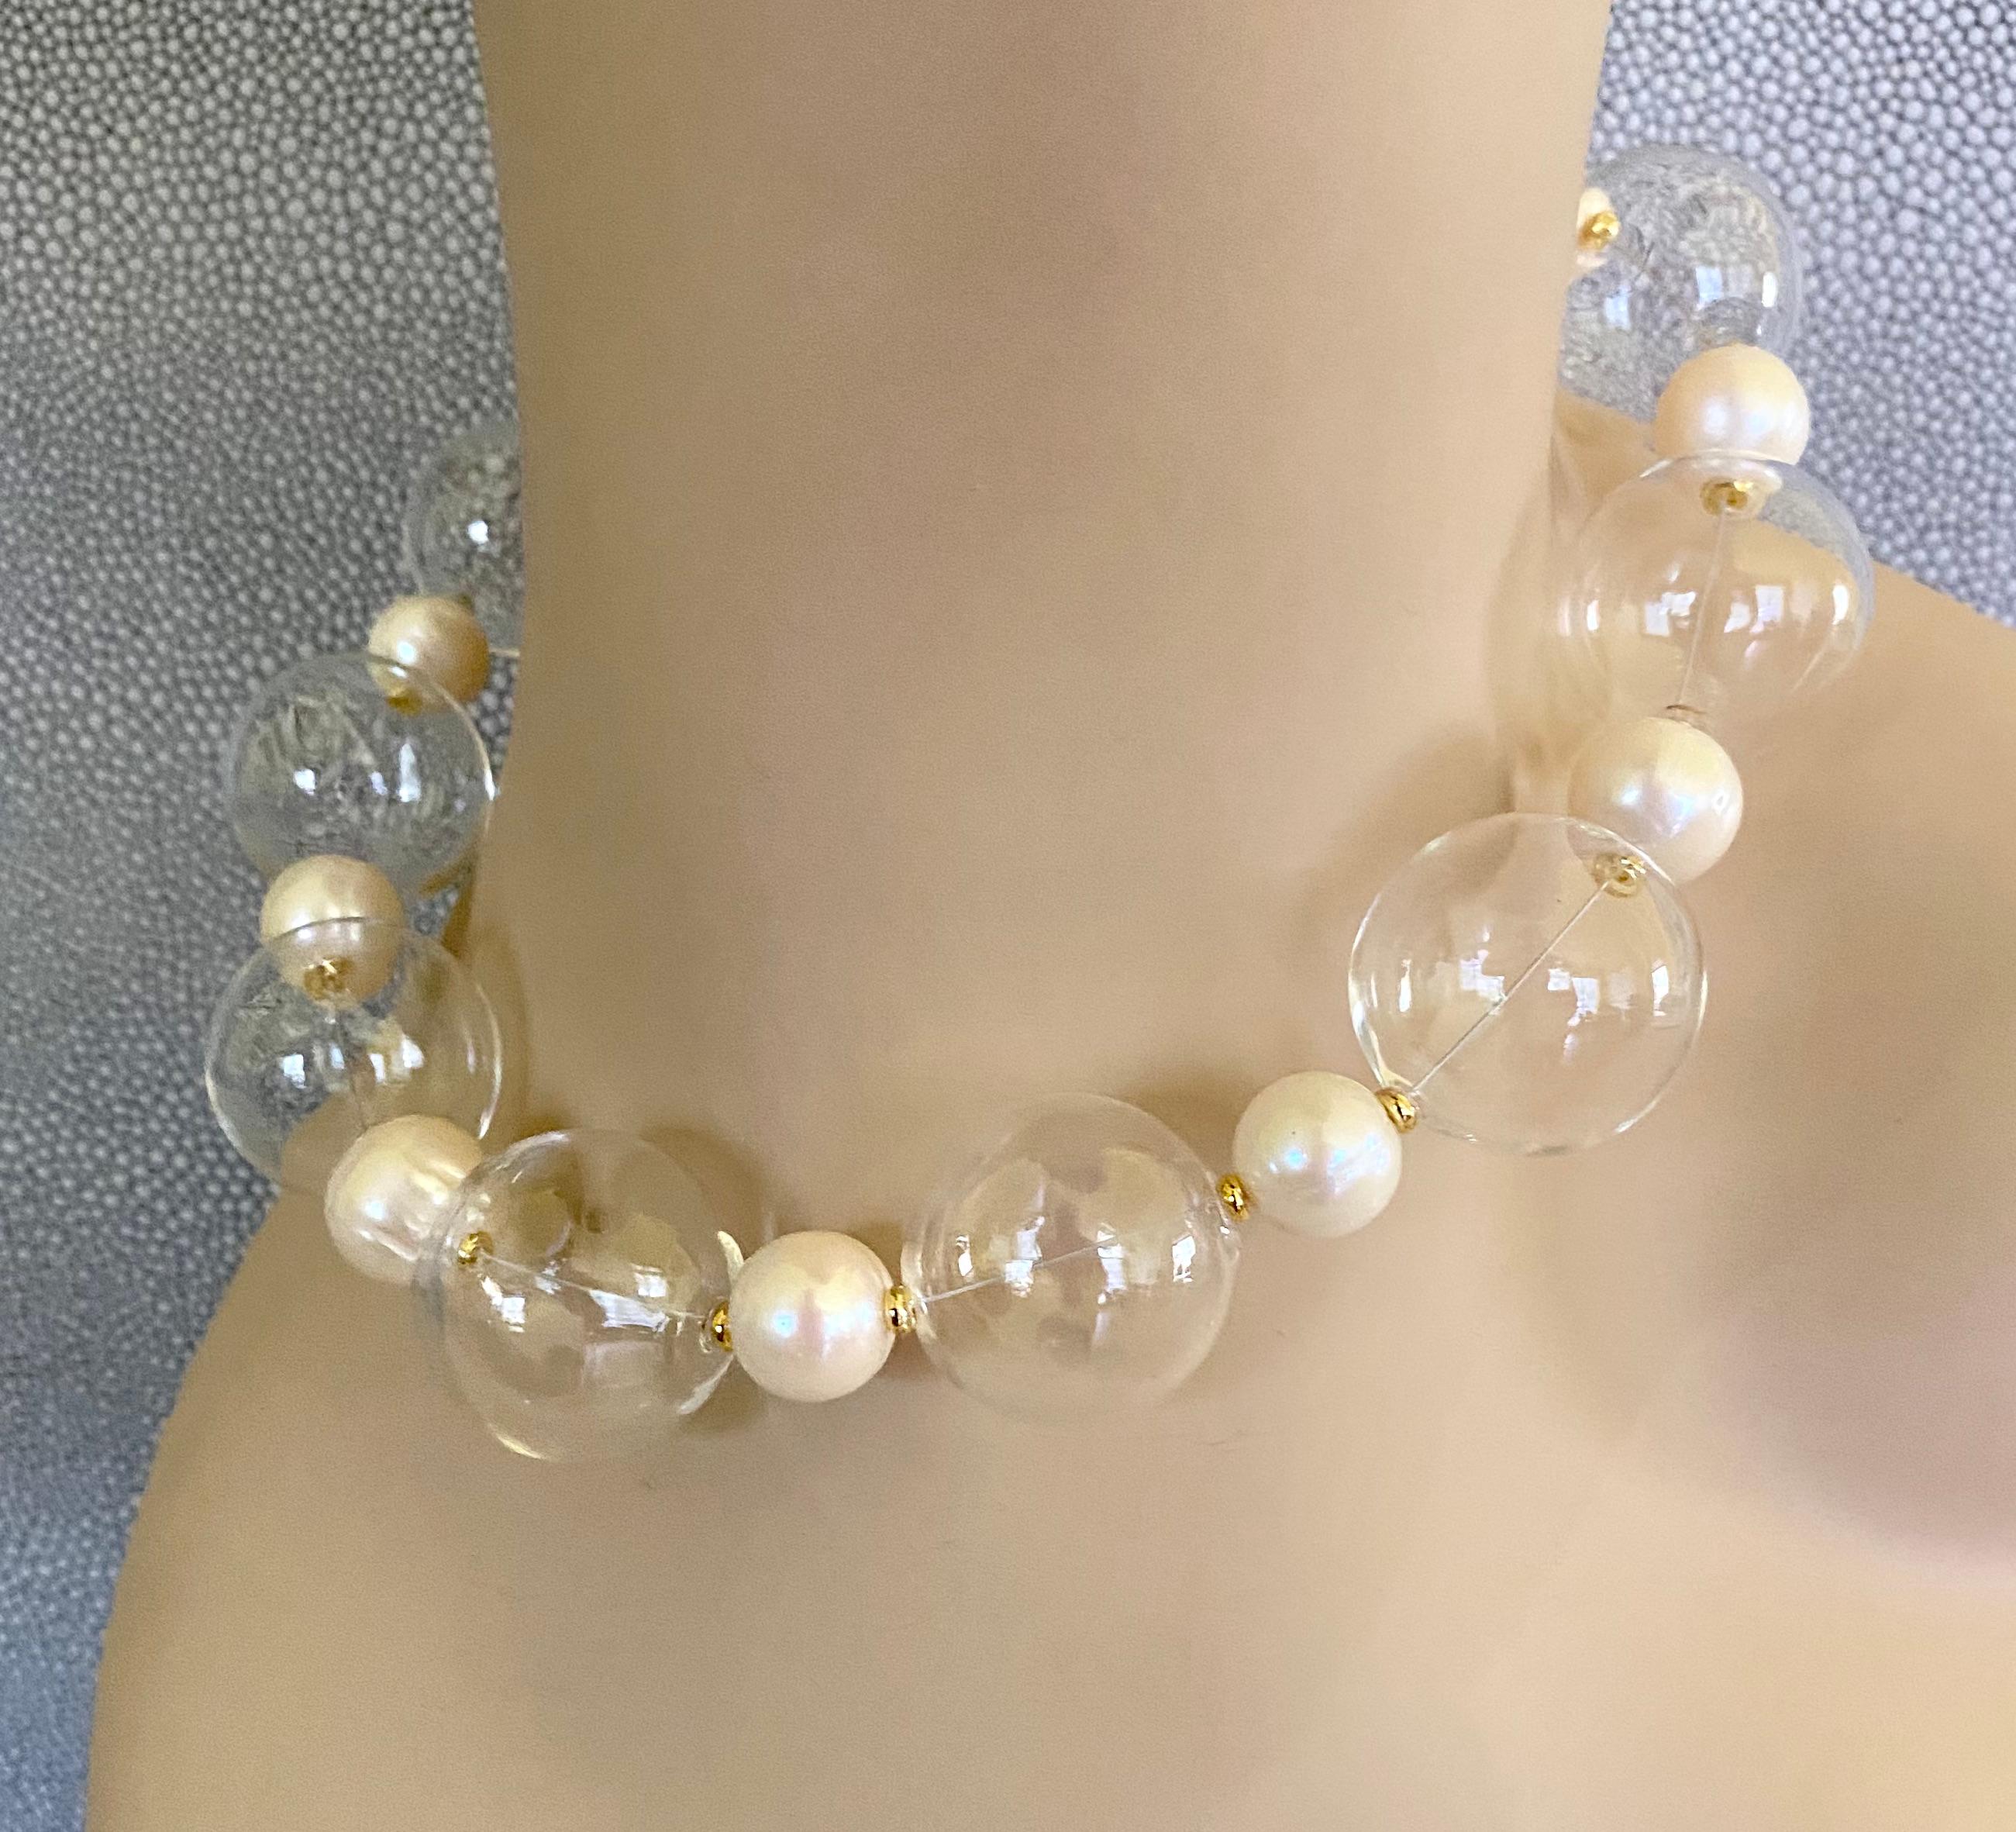 Hand blown glass bubbles are combined with white baroque pearls in this Effervescent Necklace.  The beads measure a generous 1 inch and are flawlessly created.  They are spaced with 12mm white baroque pearls along with gold rondelles.  The light as